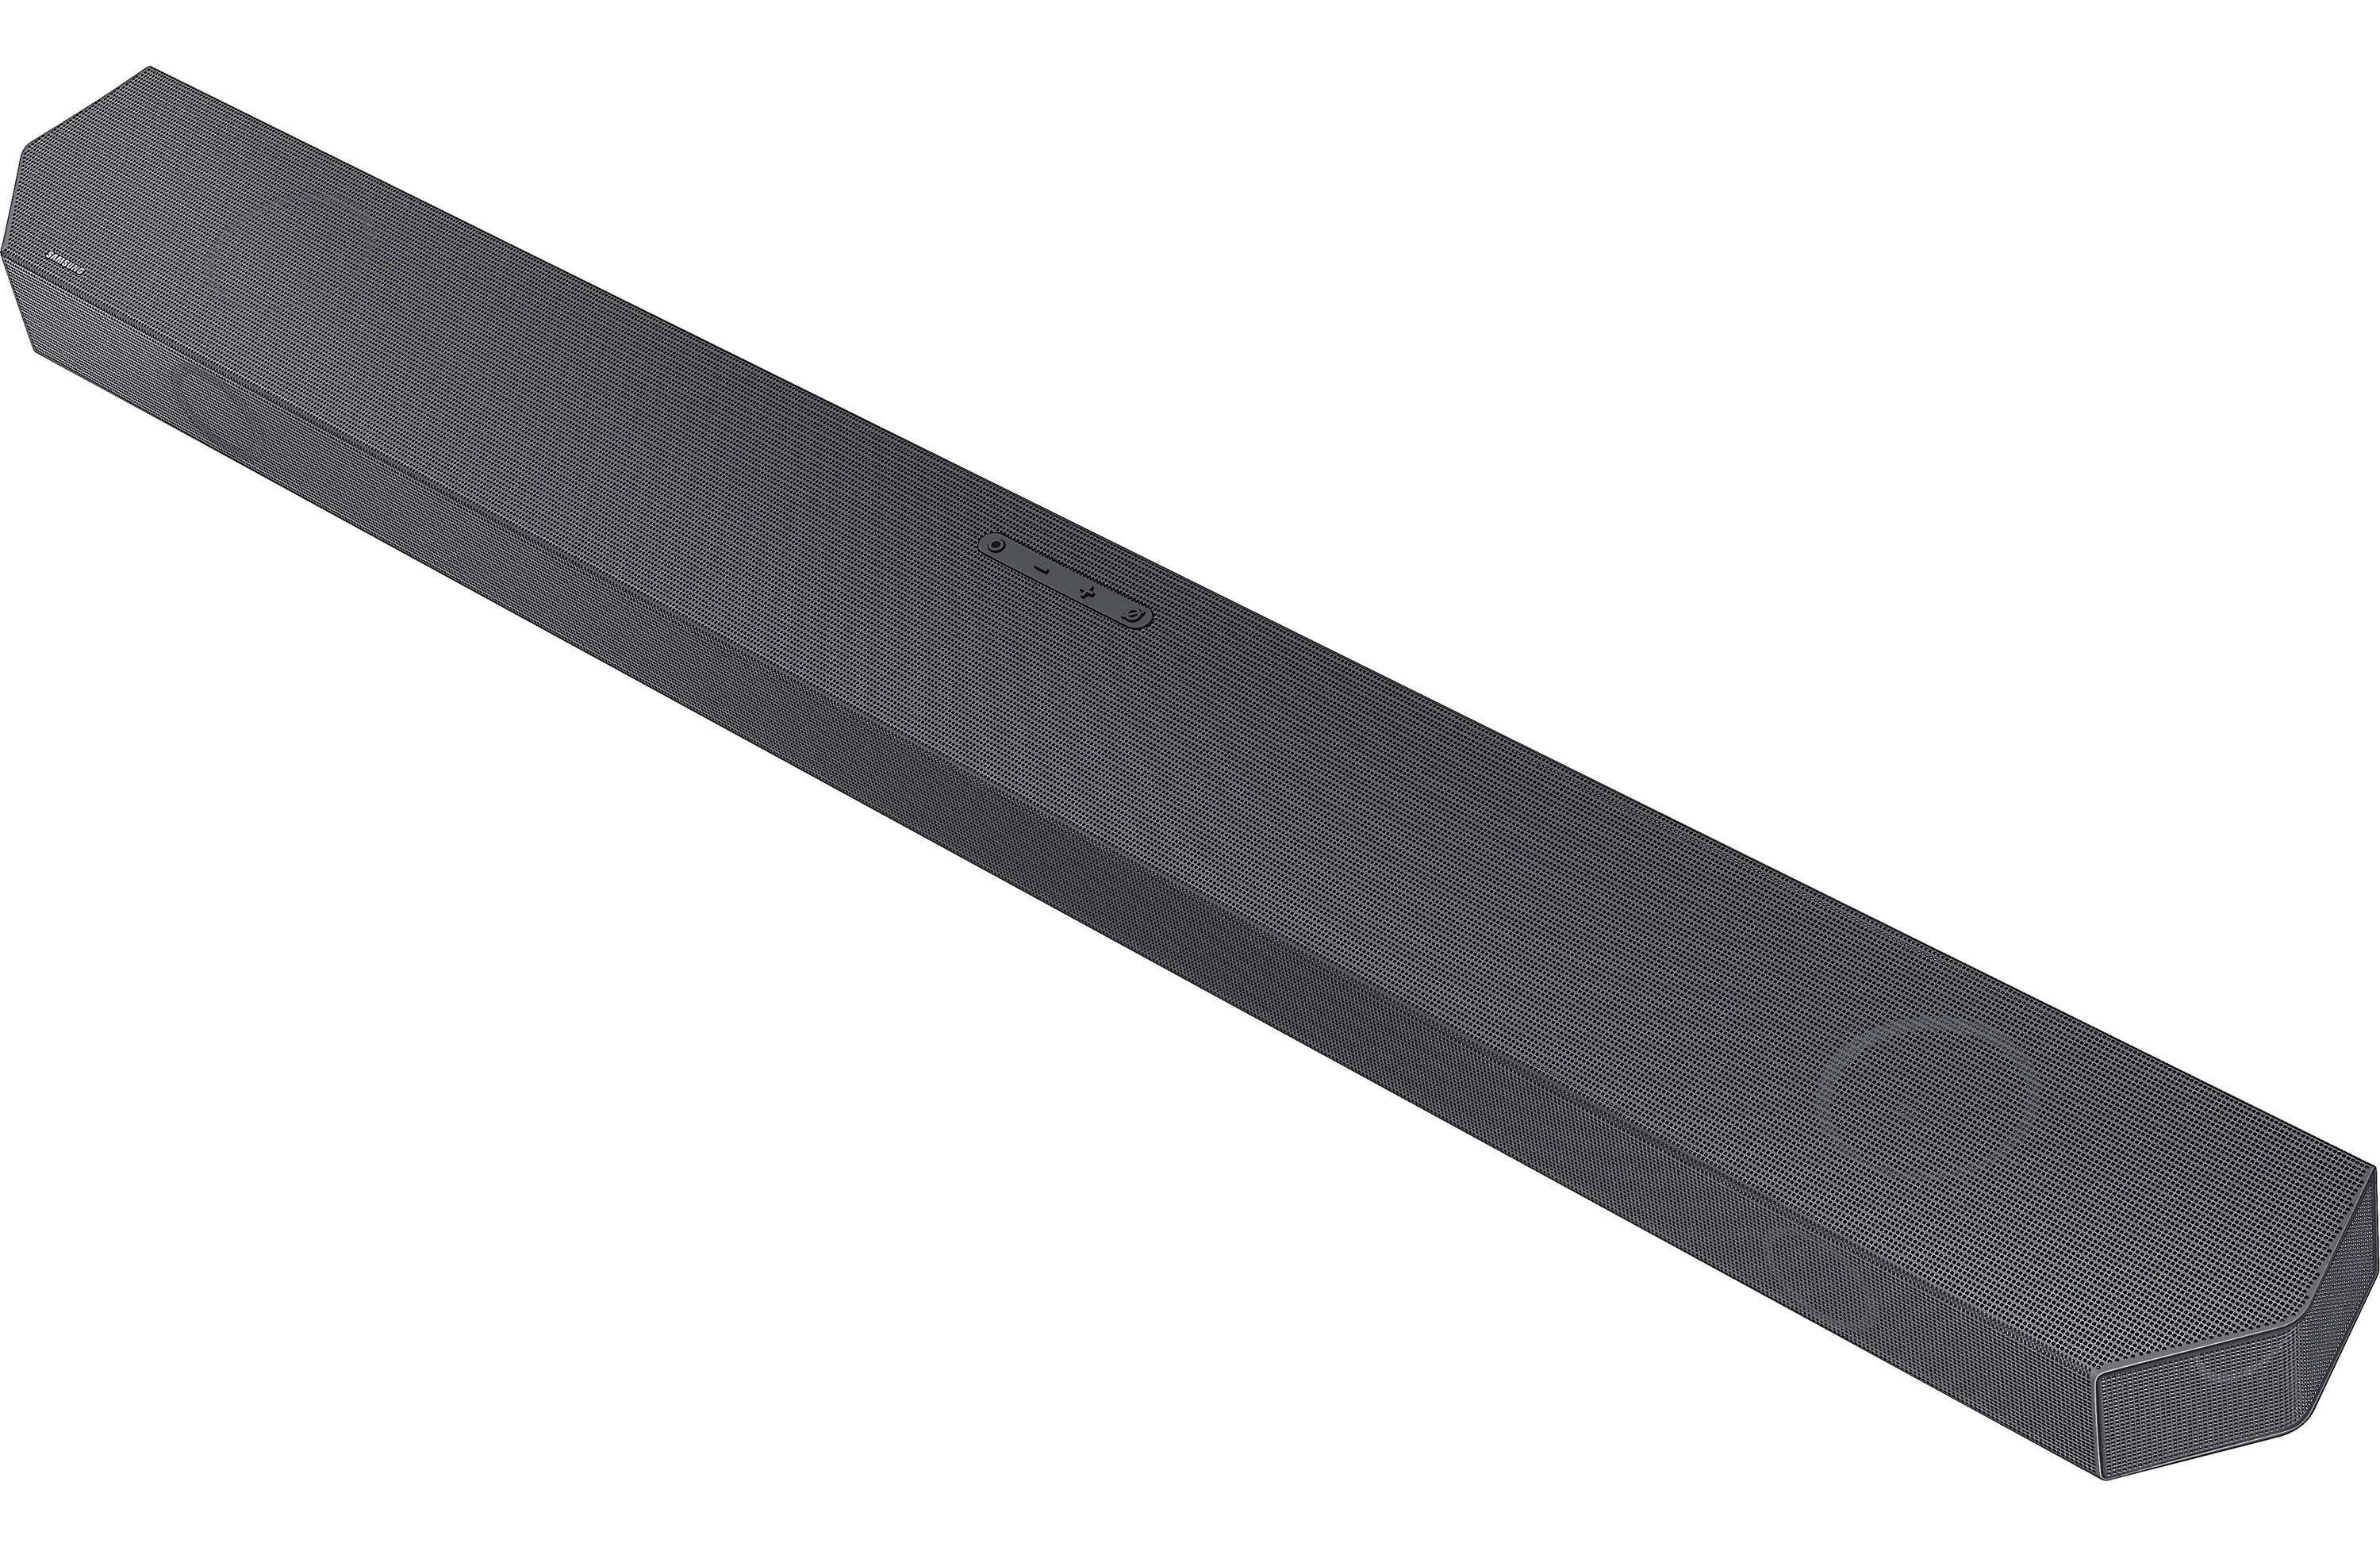 Samsung HW-Q800B Powered 5.1.2-channel sound bar and wireless subwoofer system with Wi-Fi, Dolby Atmos®, and DTS:X